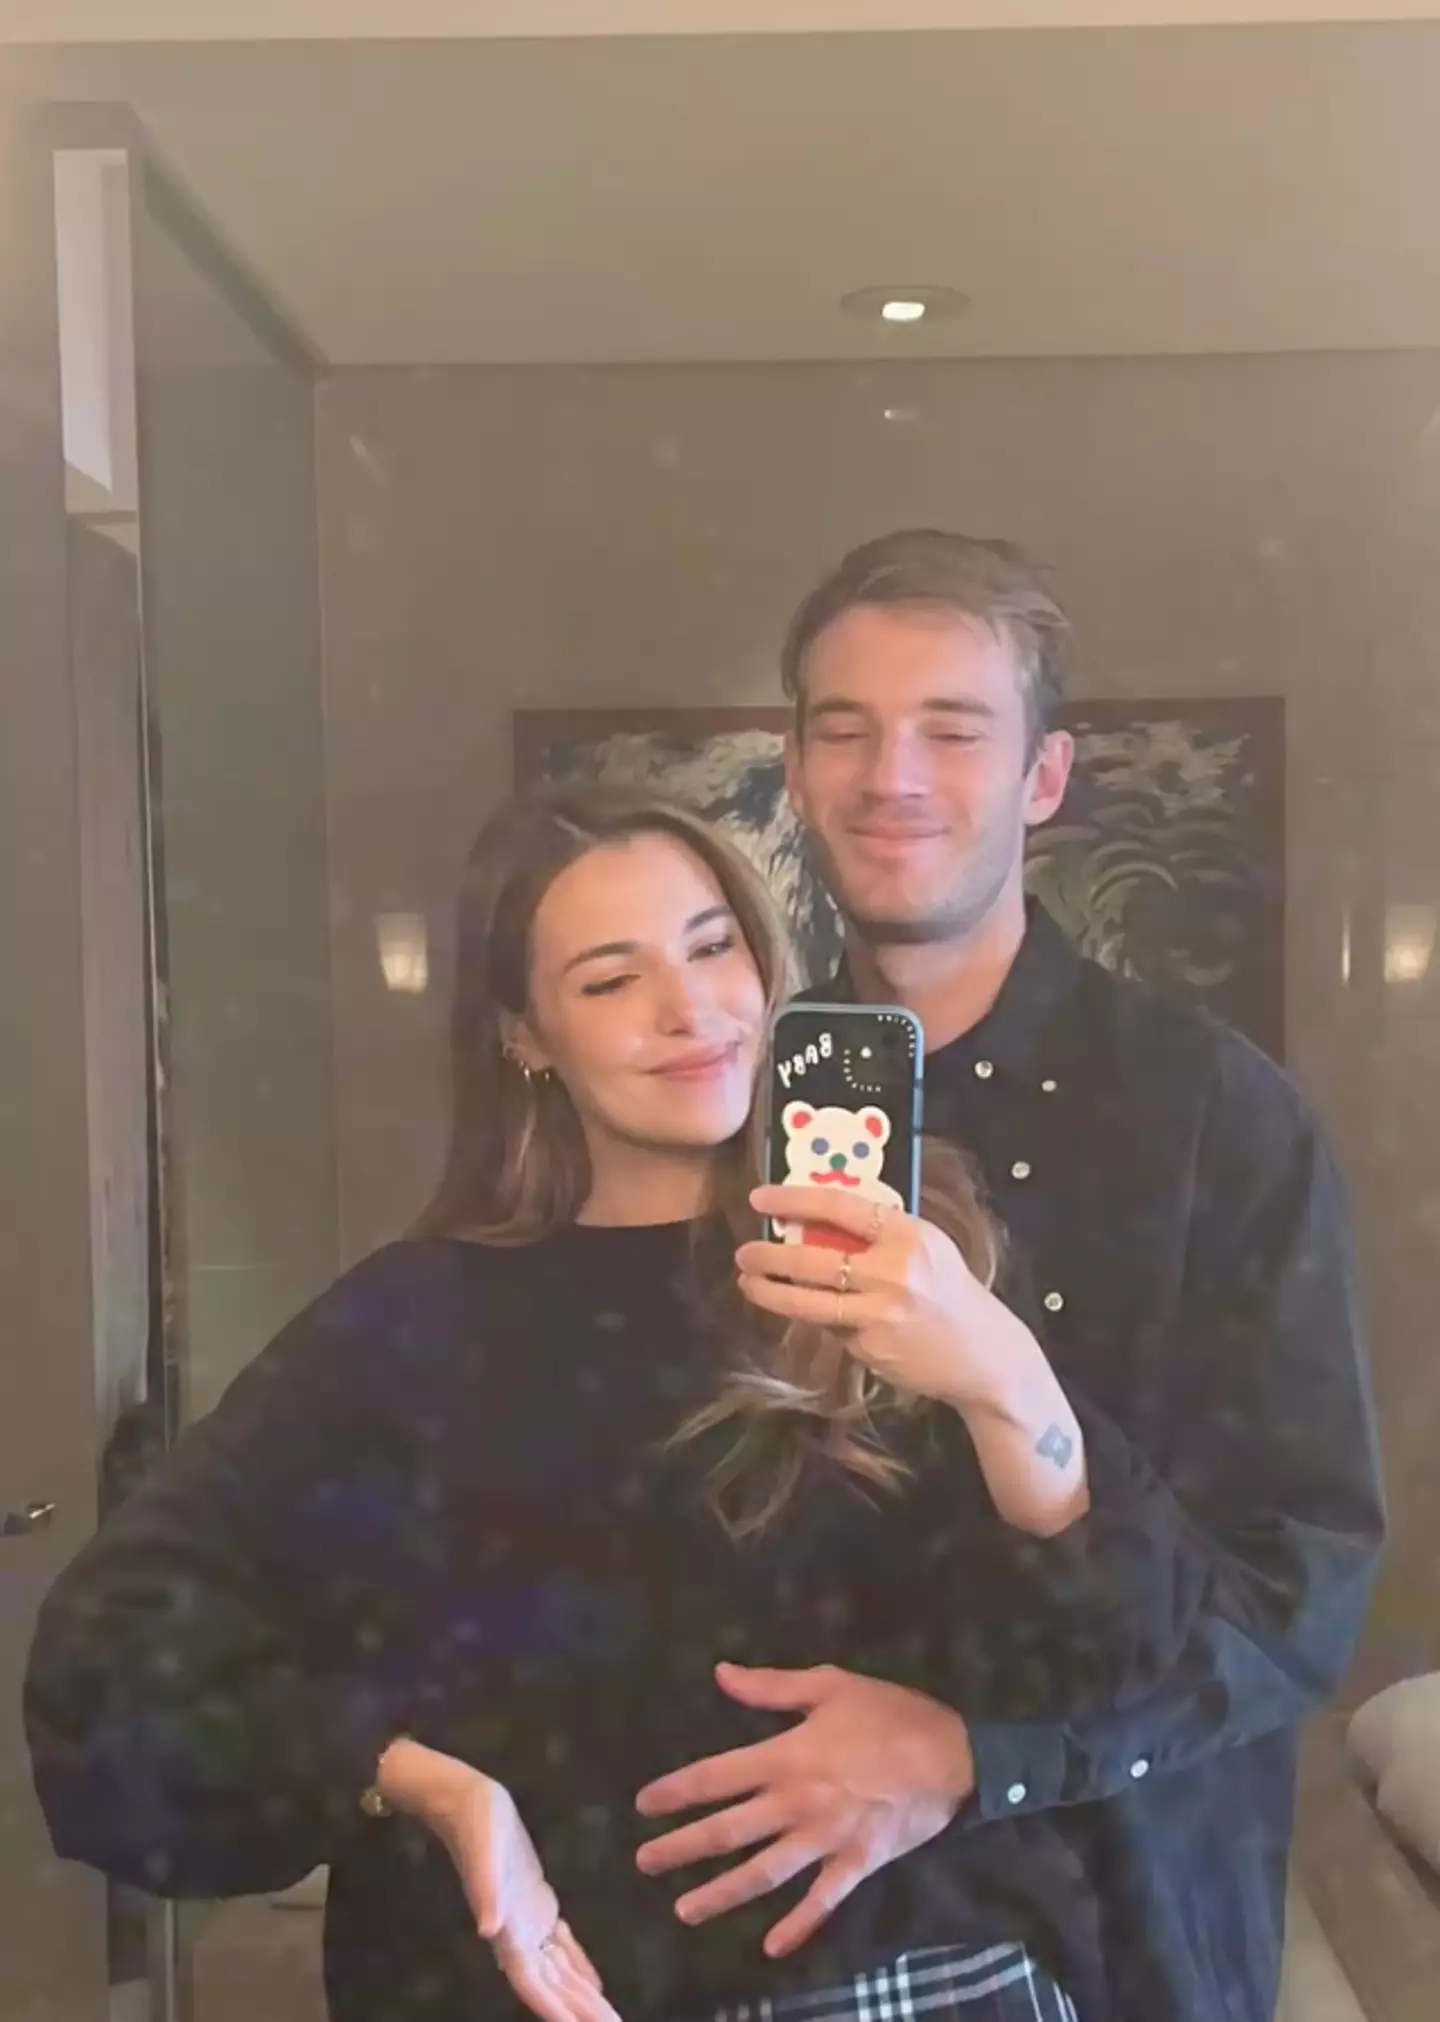 PewDiePie and Marzia announced their pregnancy in June.